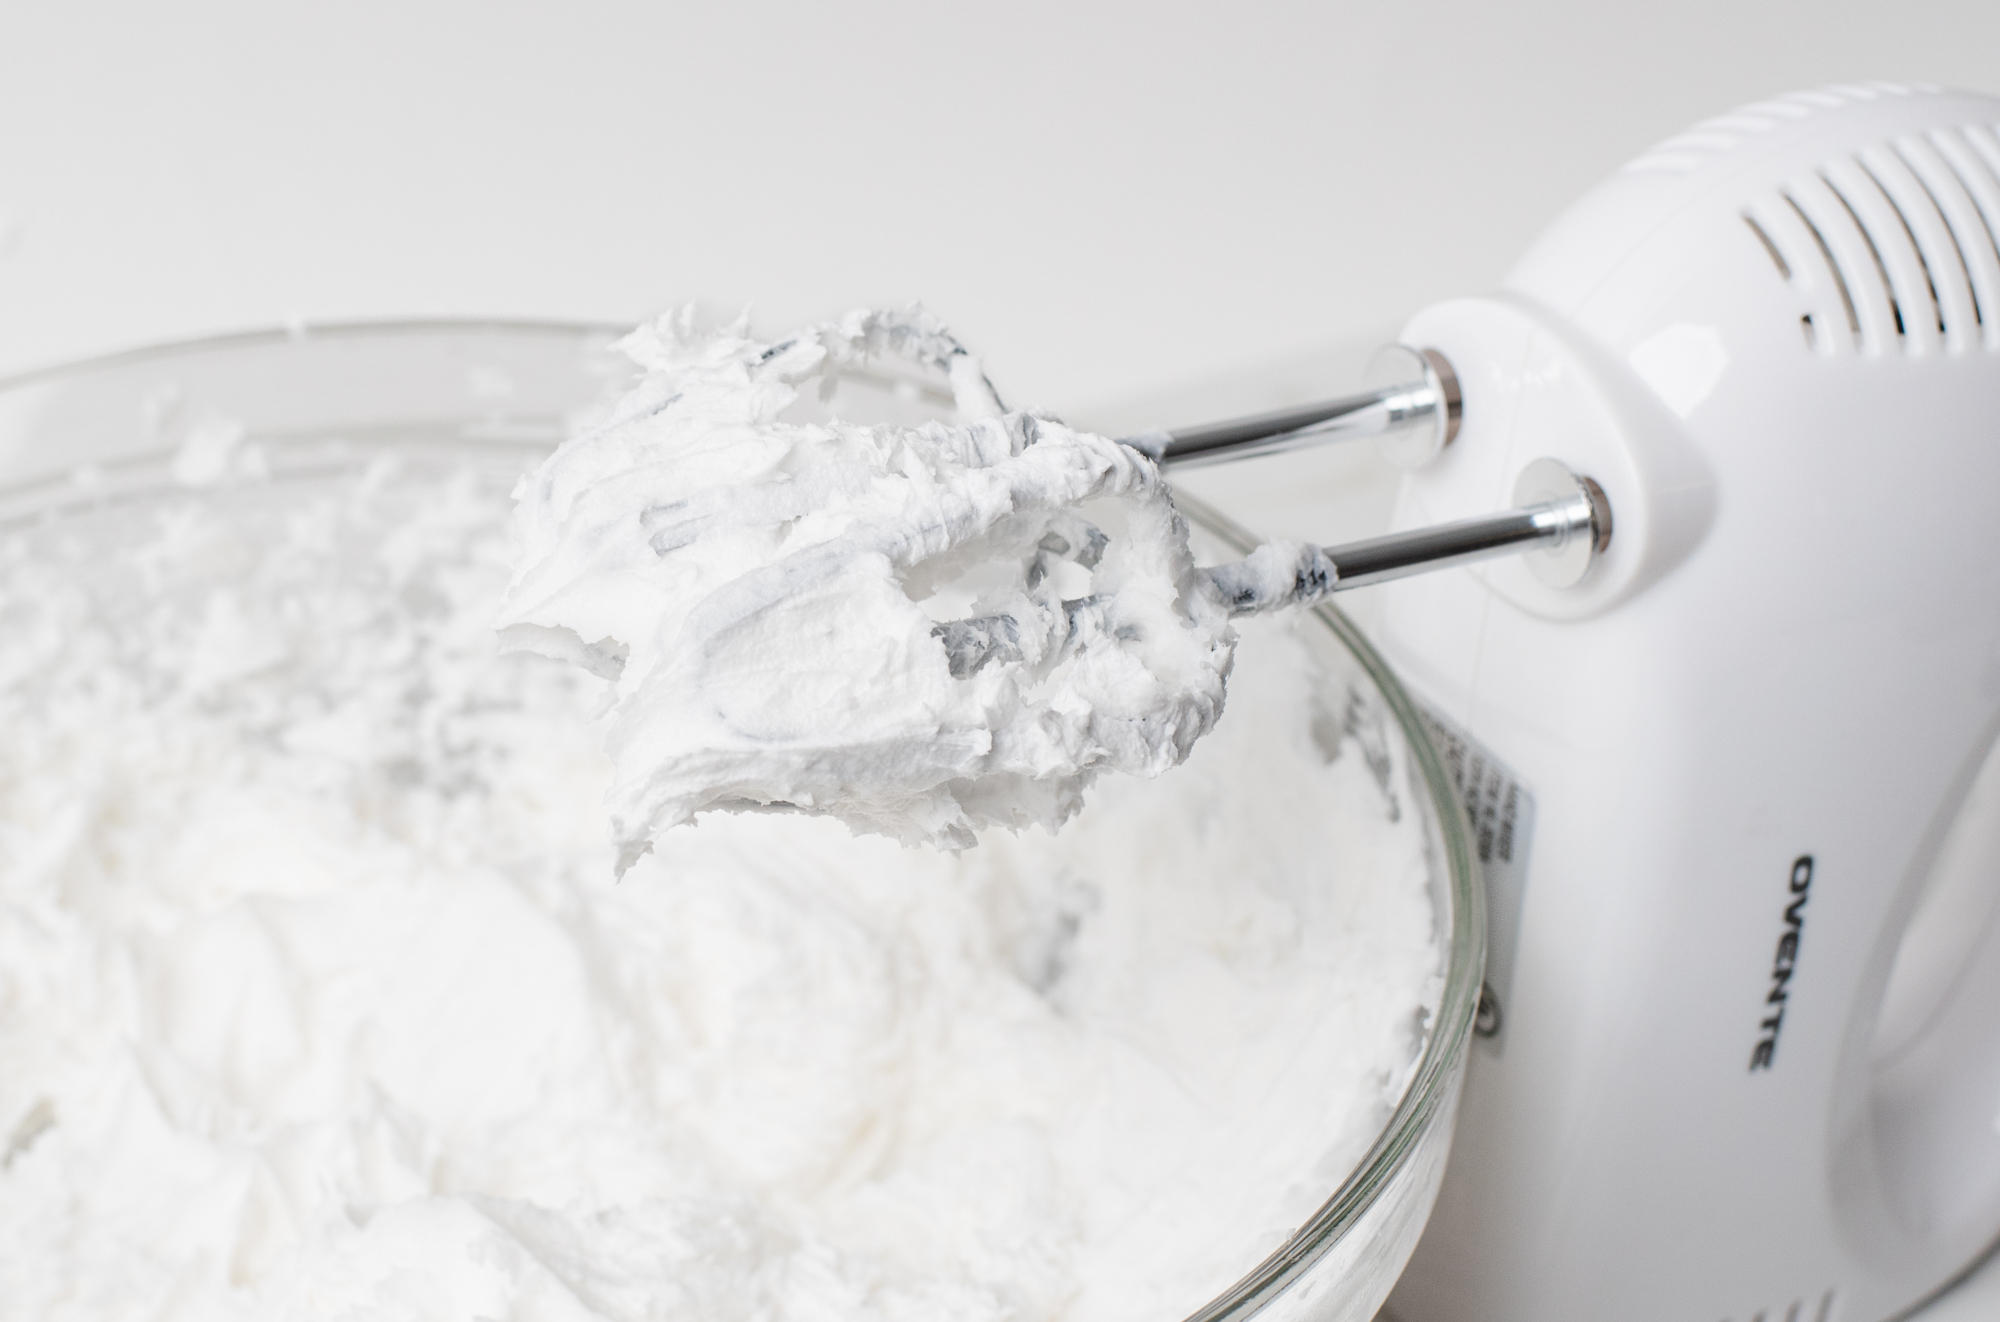 Mixing essential oil into whipped soap.